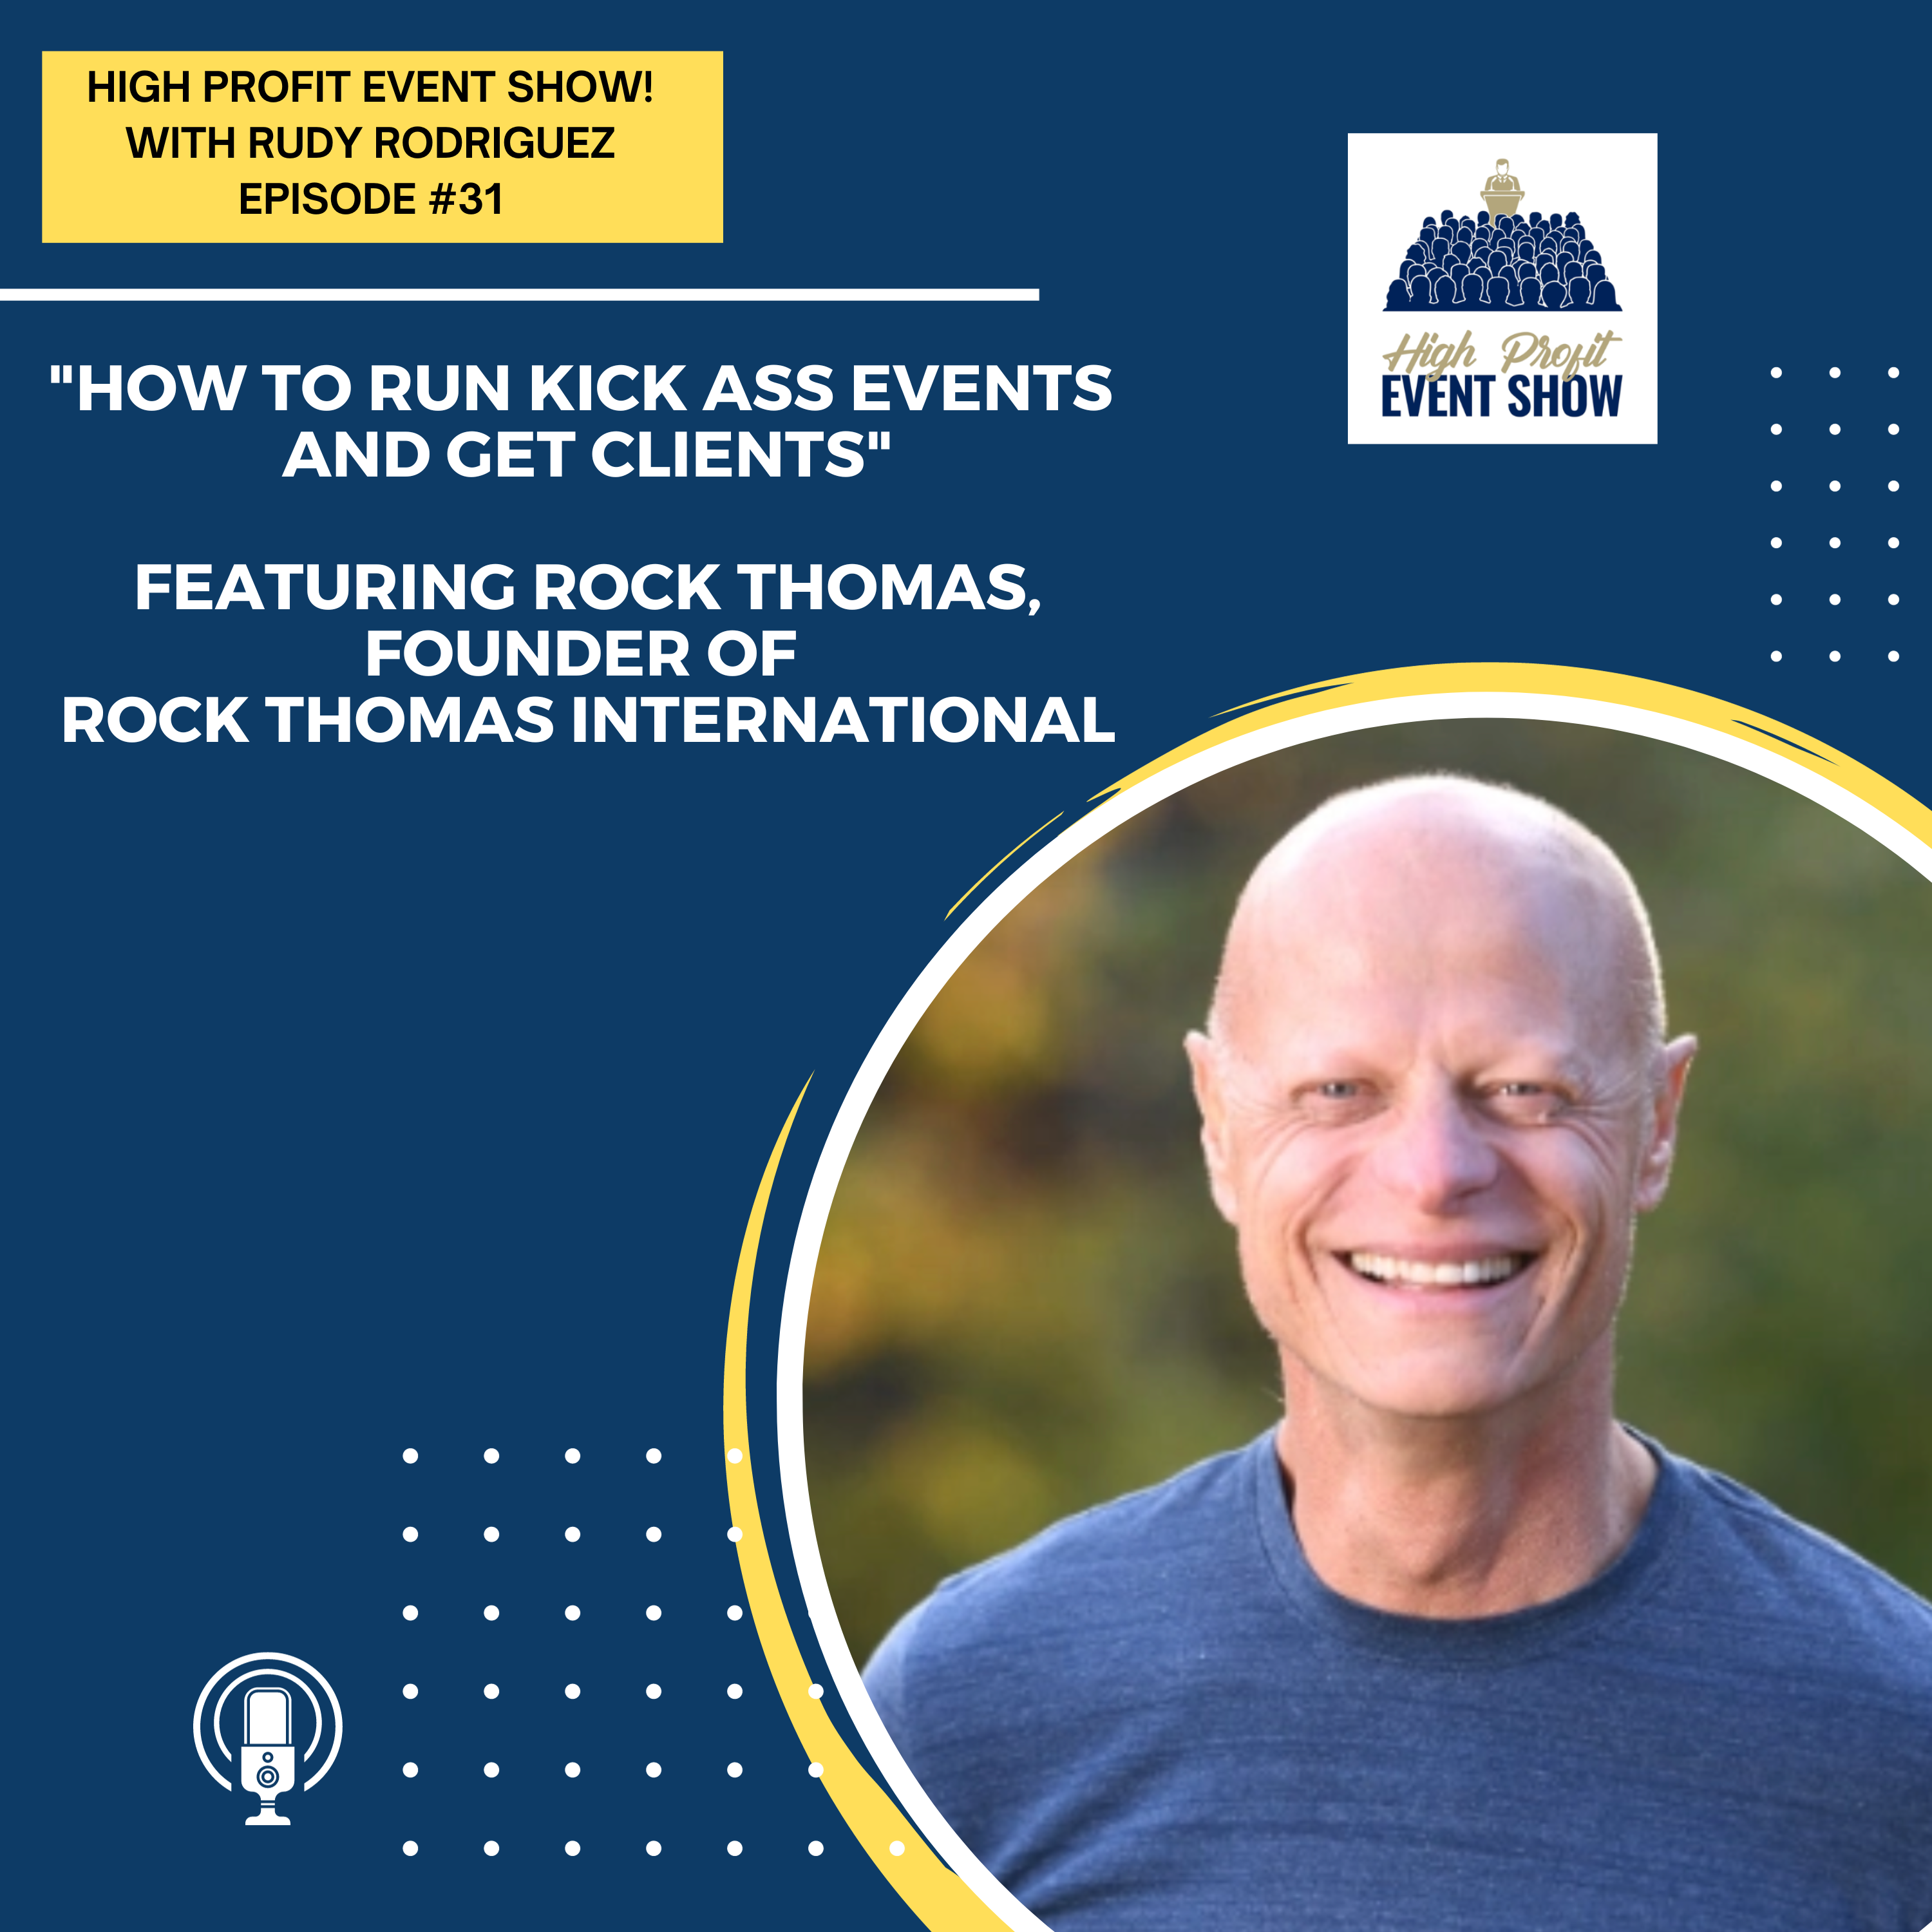 Episode 31: How to Run Kick Ass Events and Get Clients with Rock Thomas!